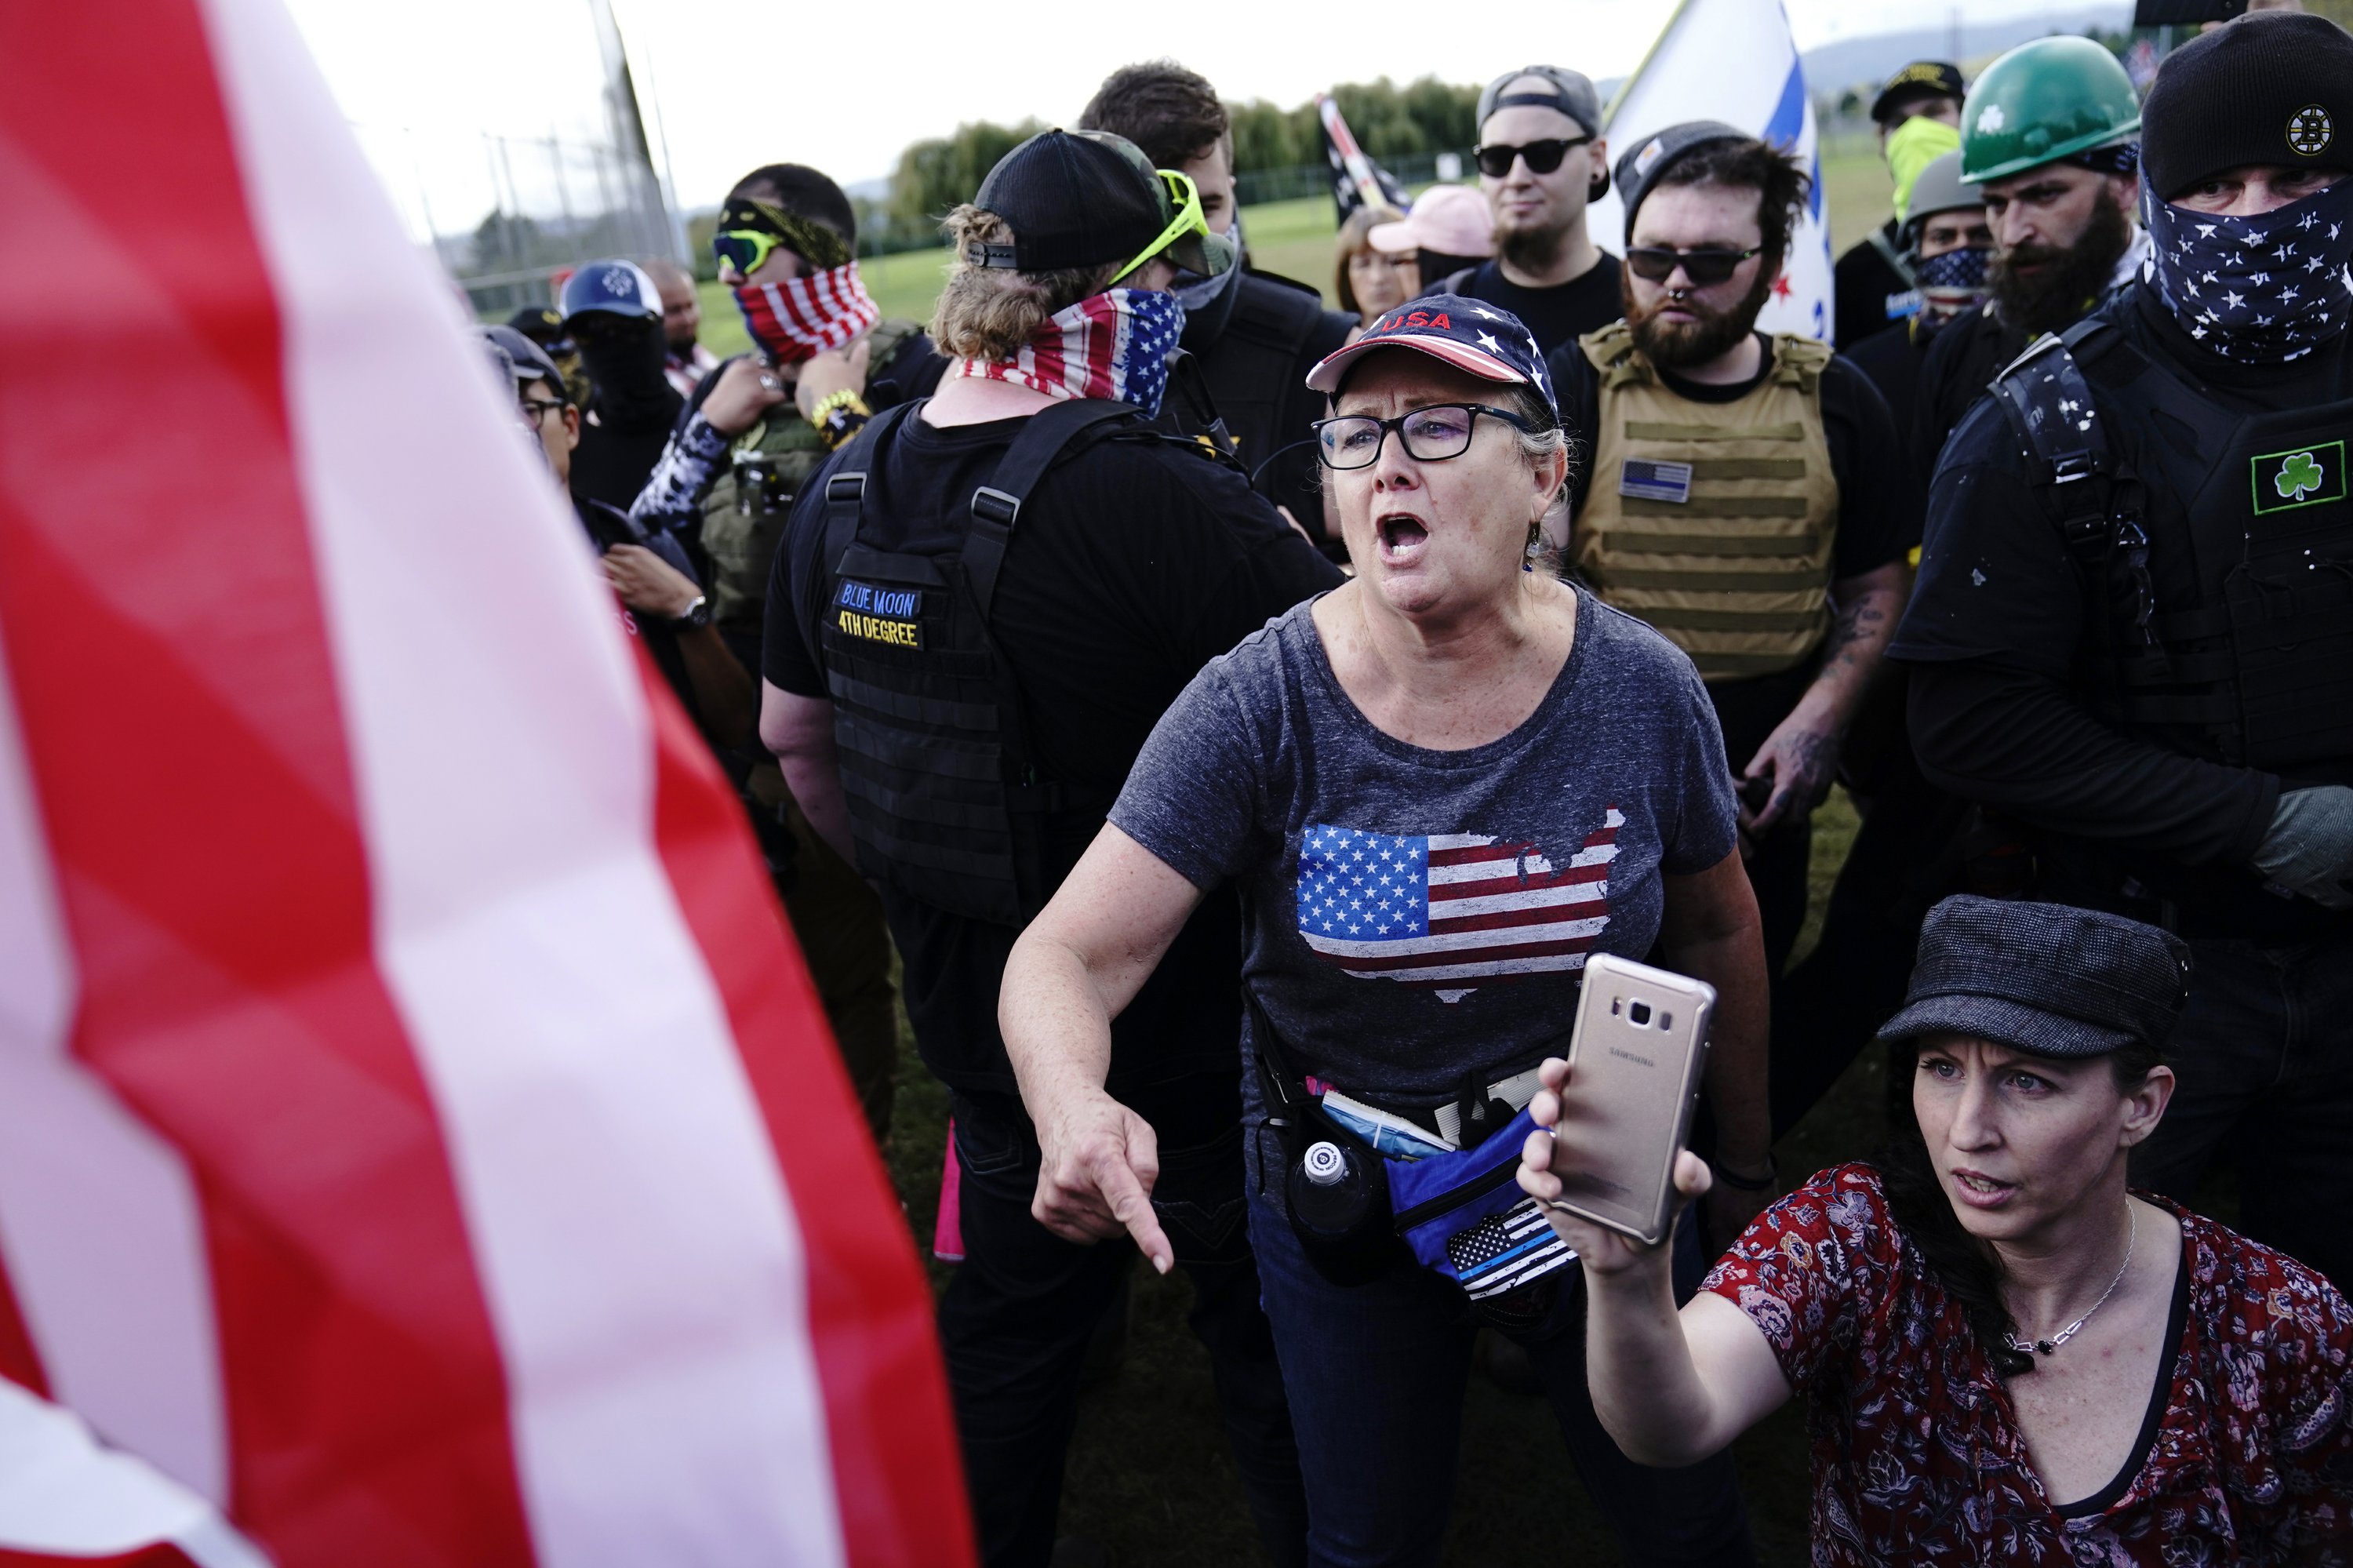 Woman Indicted in Capitol Melee Says Proud Boys Recruited Her